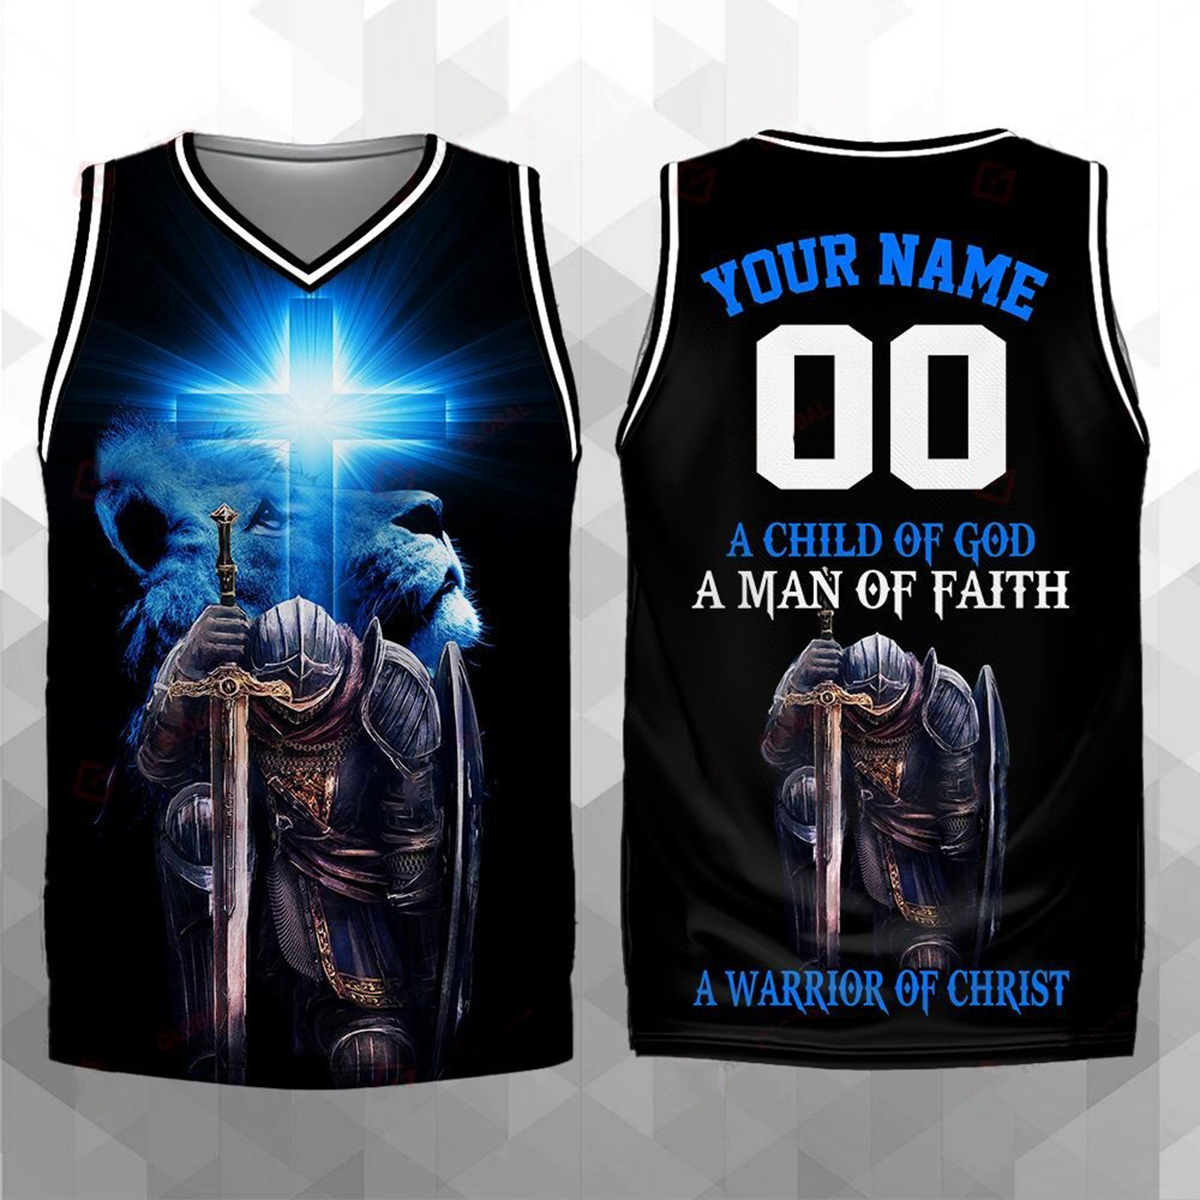 A child of god A man of faith A warrior of Christ personalized basketball jersey tank top